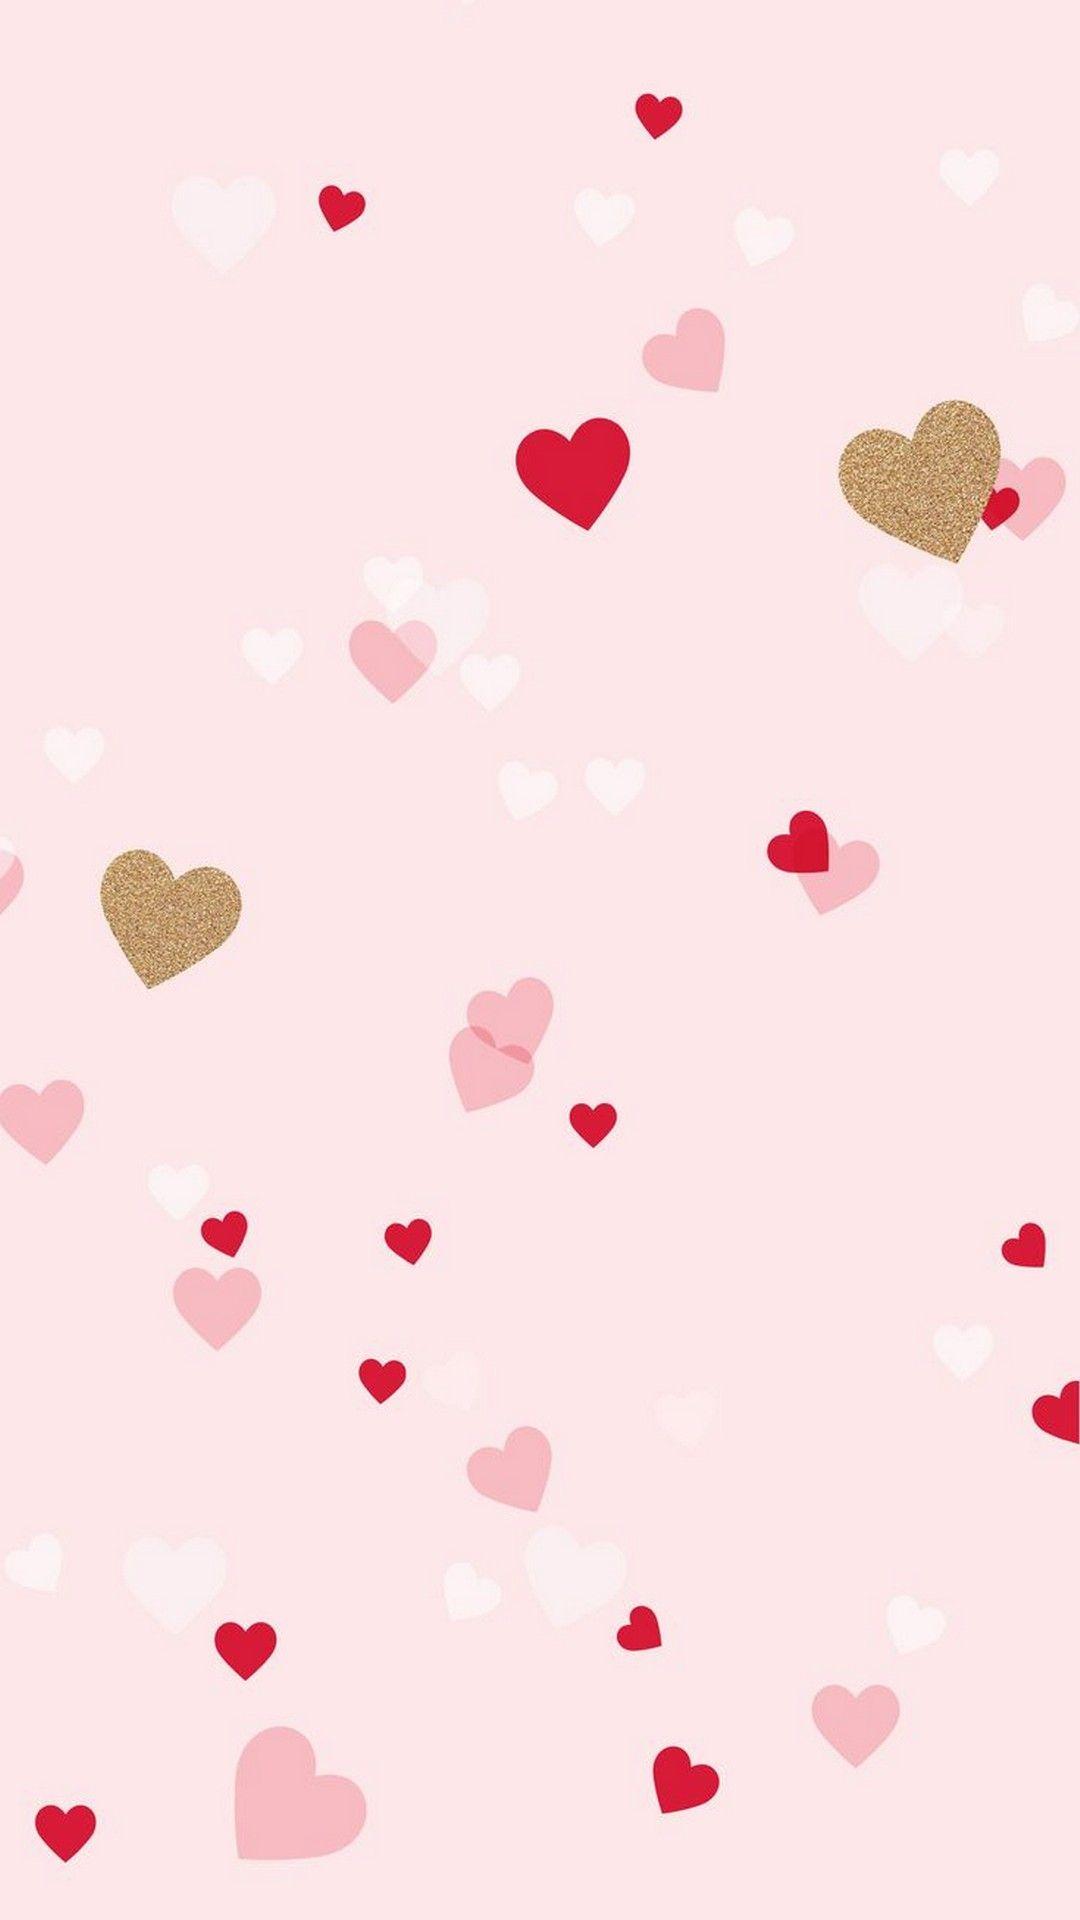 Valentine Wallpaper For iPhone 7 iPhone Wallpaper. iPhone